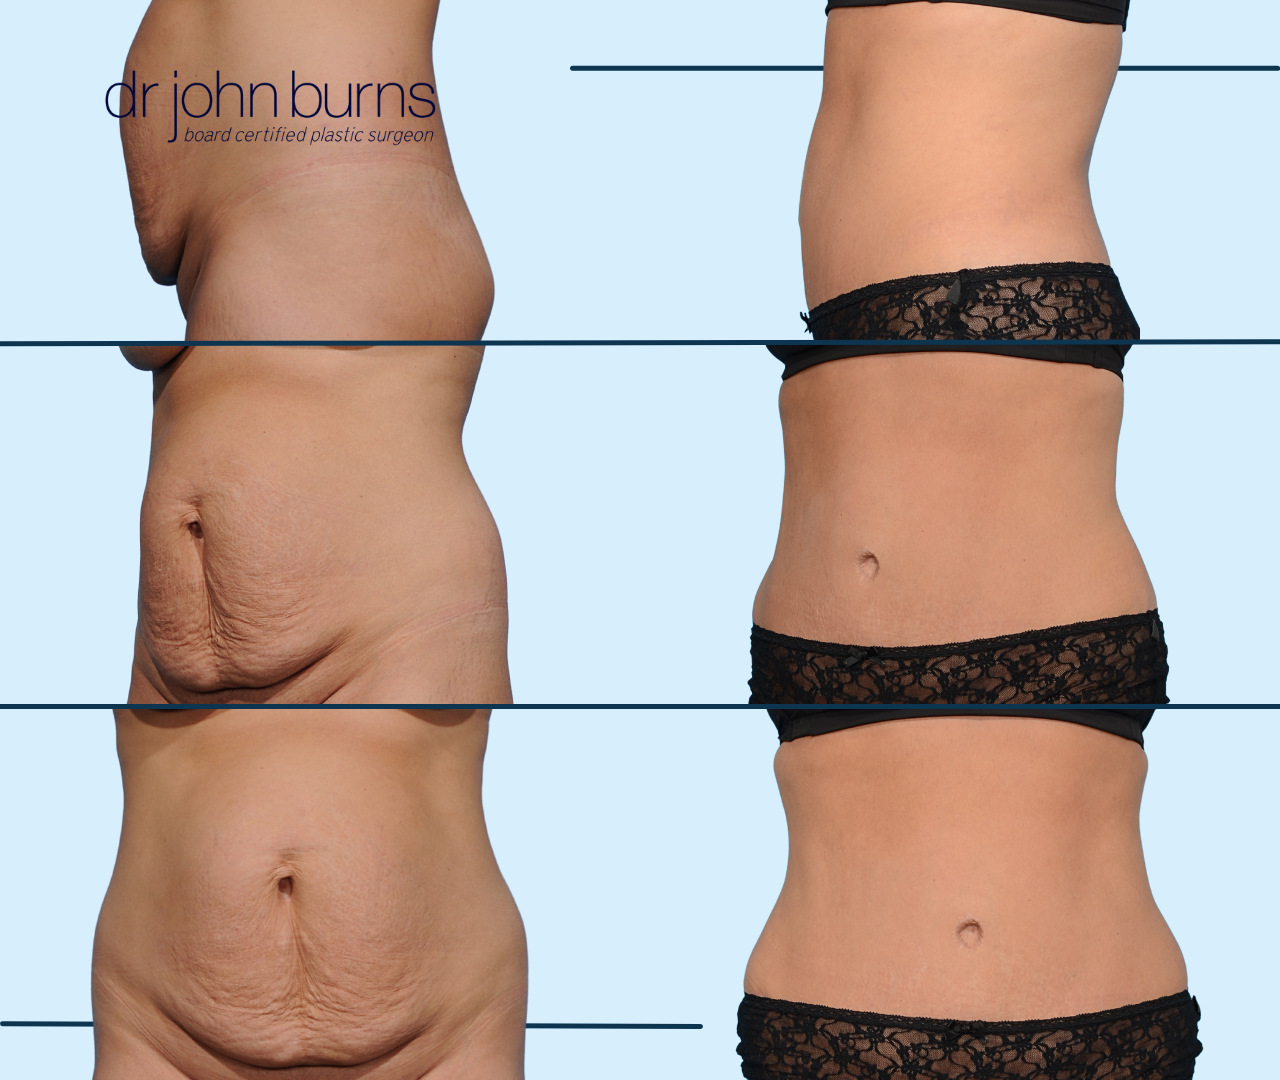 Case 22- Before & After Standard Tummy Tuck by Dallas Plastic Surgeon, Dr. John Burns